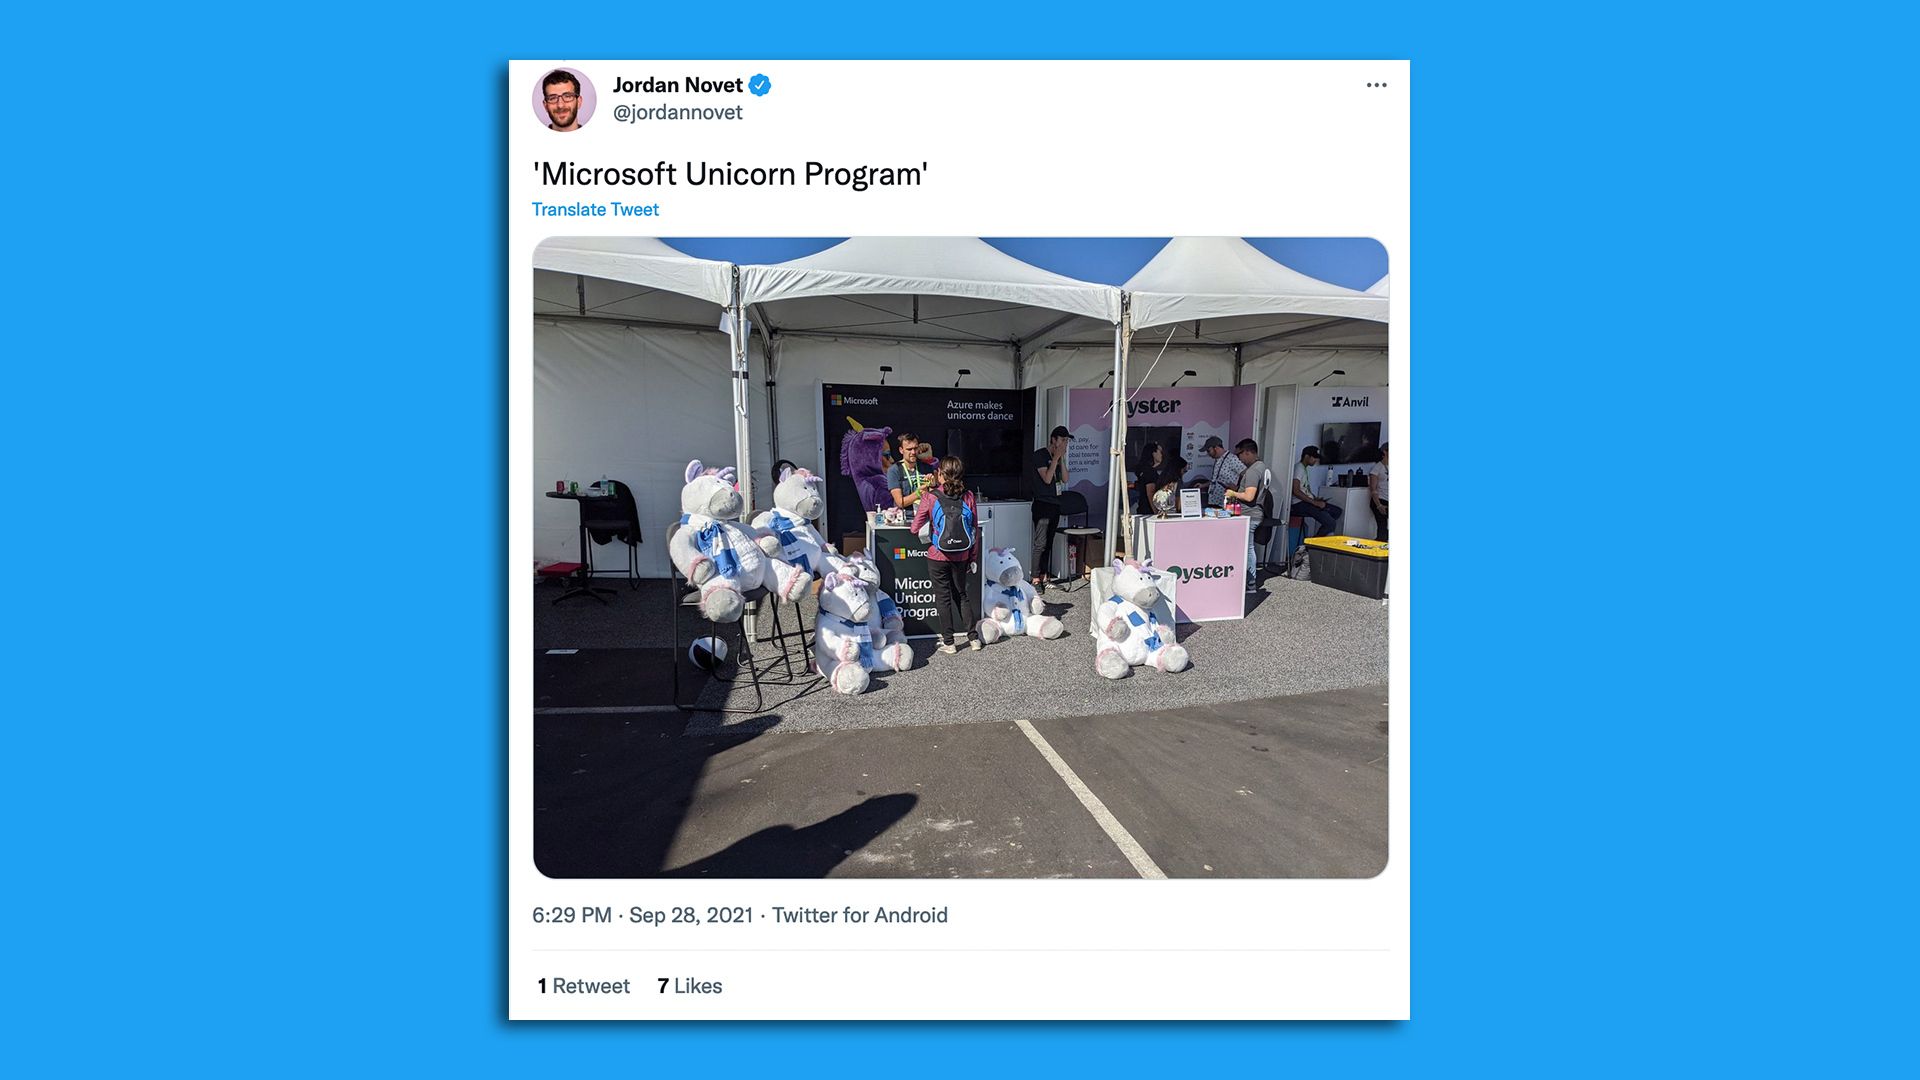 Screen shot of tweet from Jordan Novet of Microsoft's booth at the SaaStr conference with text: "Microsoft Unicorn Program"